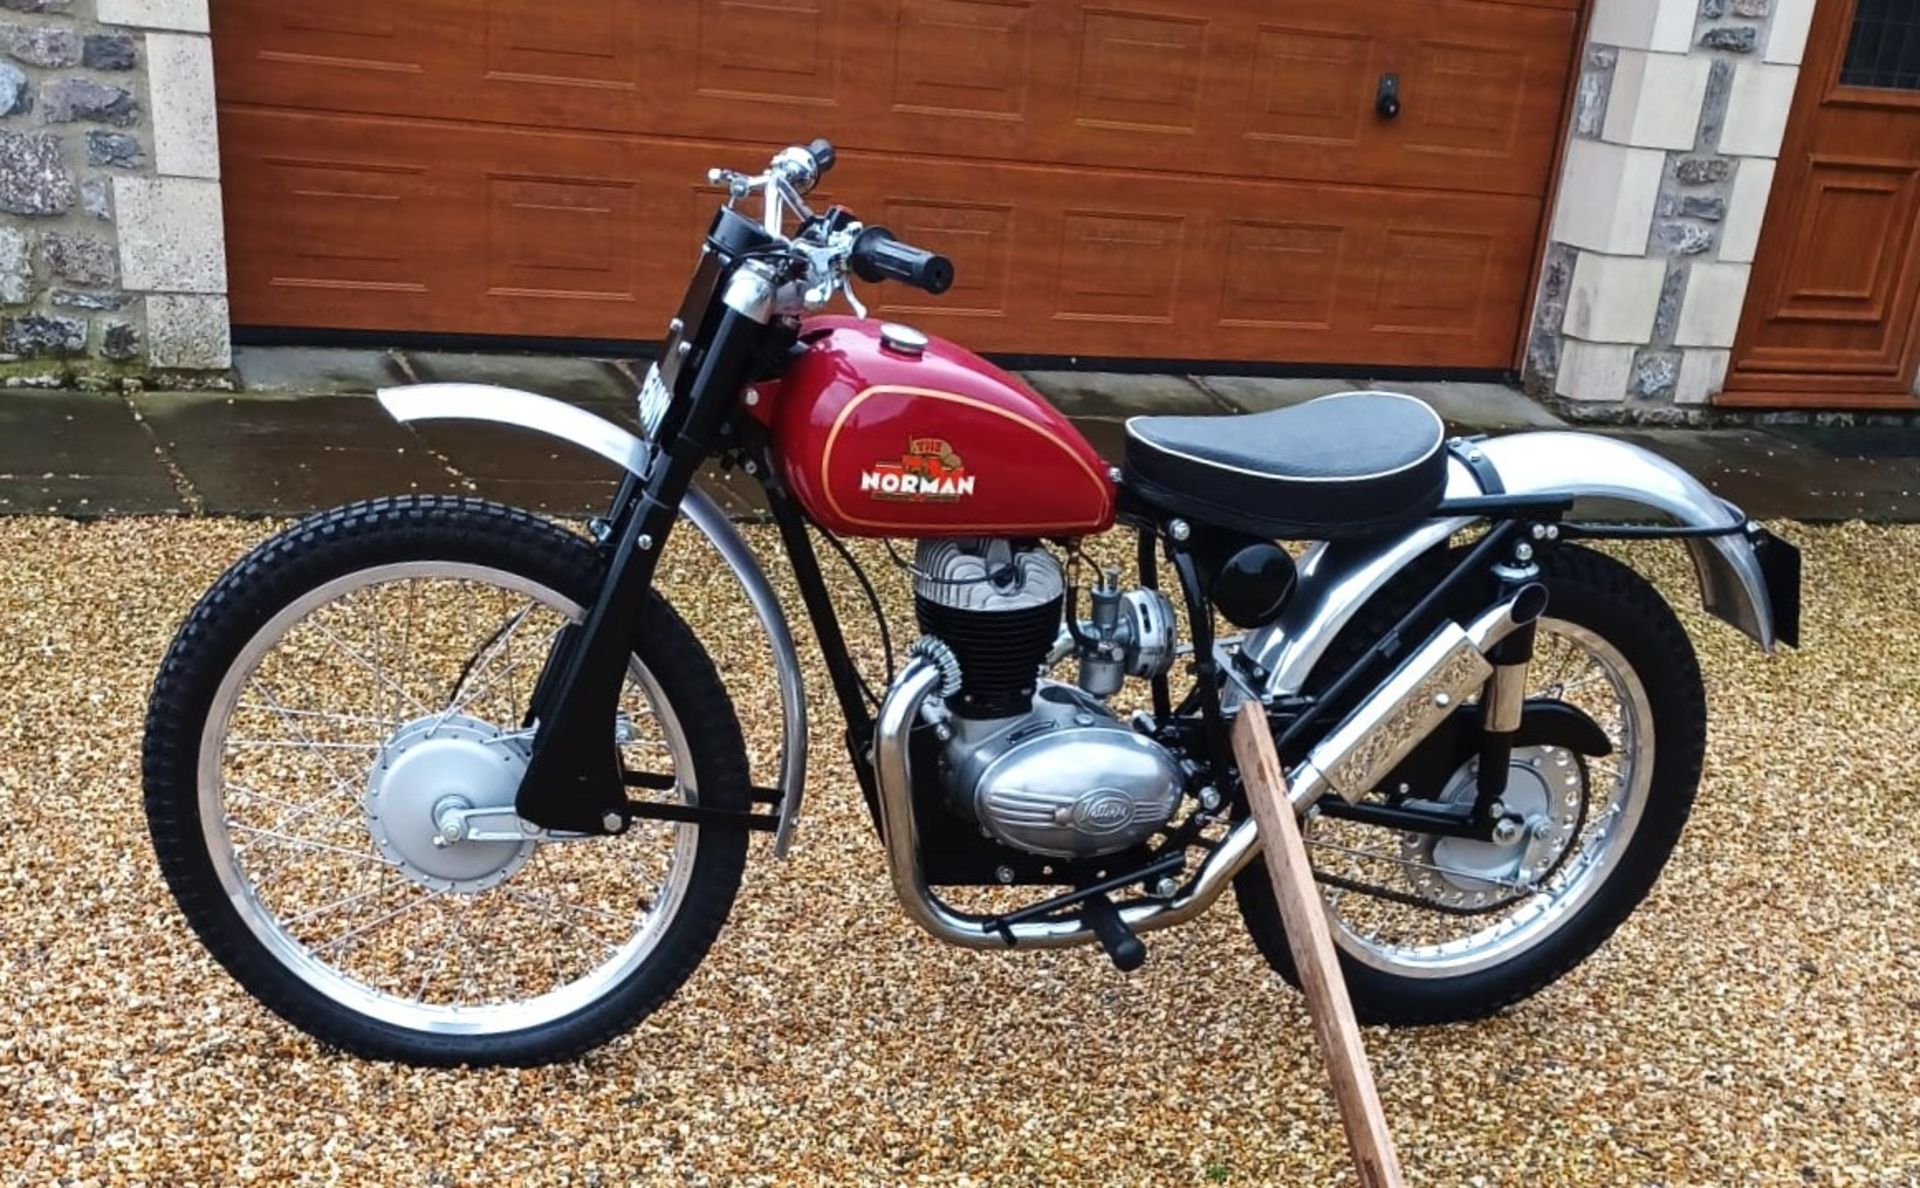 1961 NORMAN TRIALS Registration Number: 956 UYY Frame Number: TBA Recorded Mileage: 18 miles - Nut - Image 2 of 14